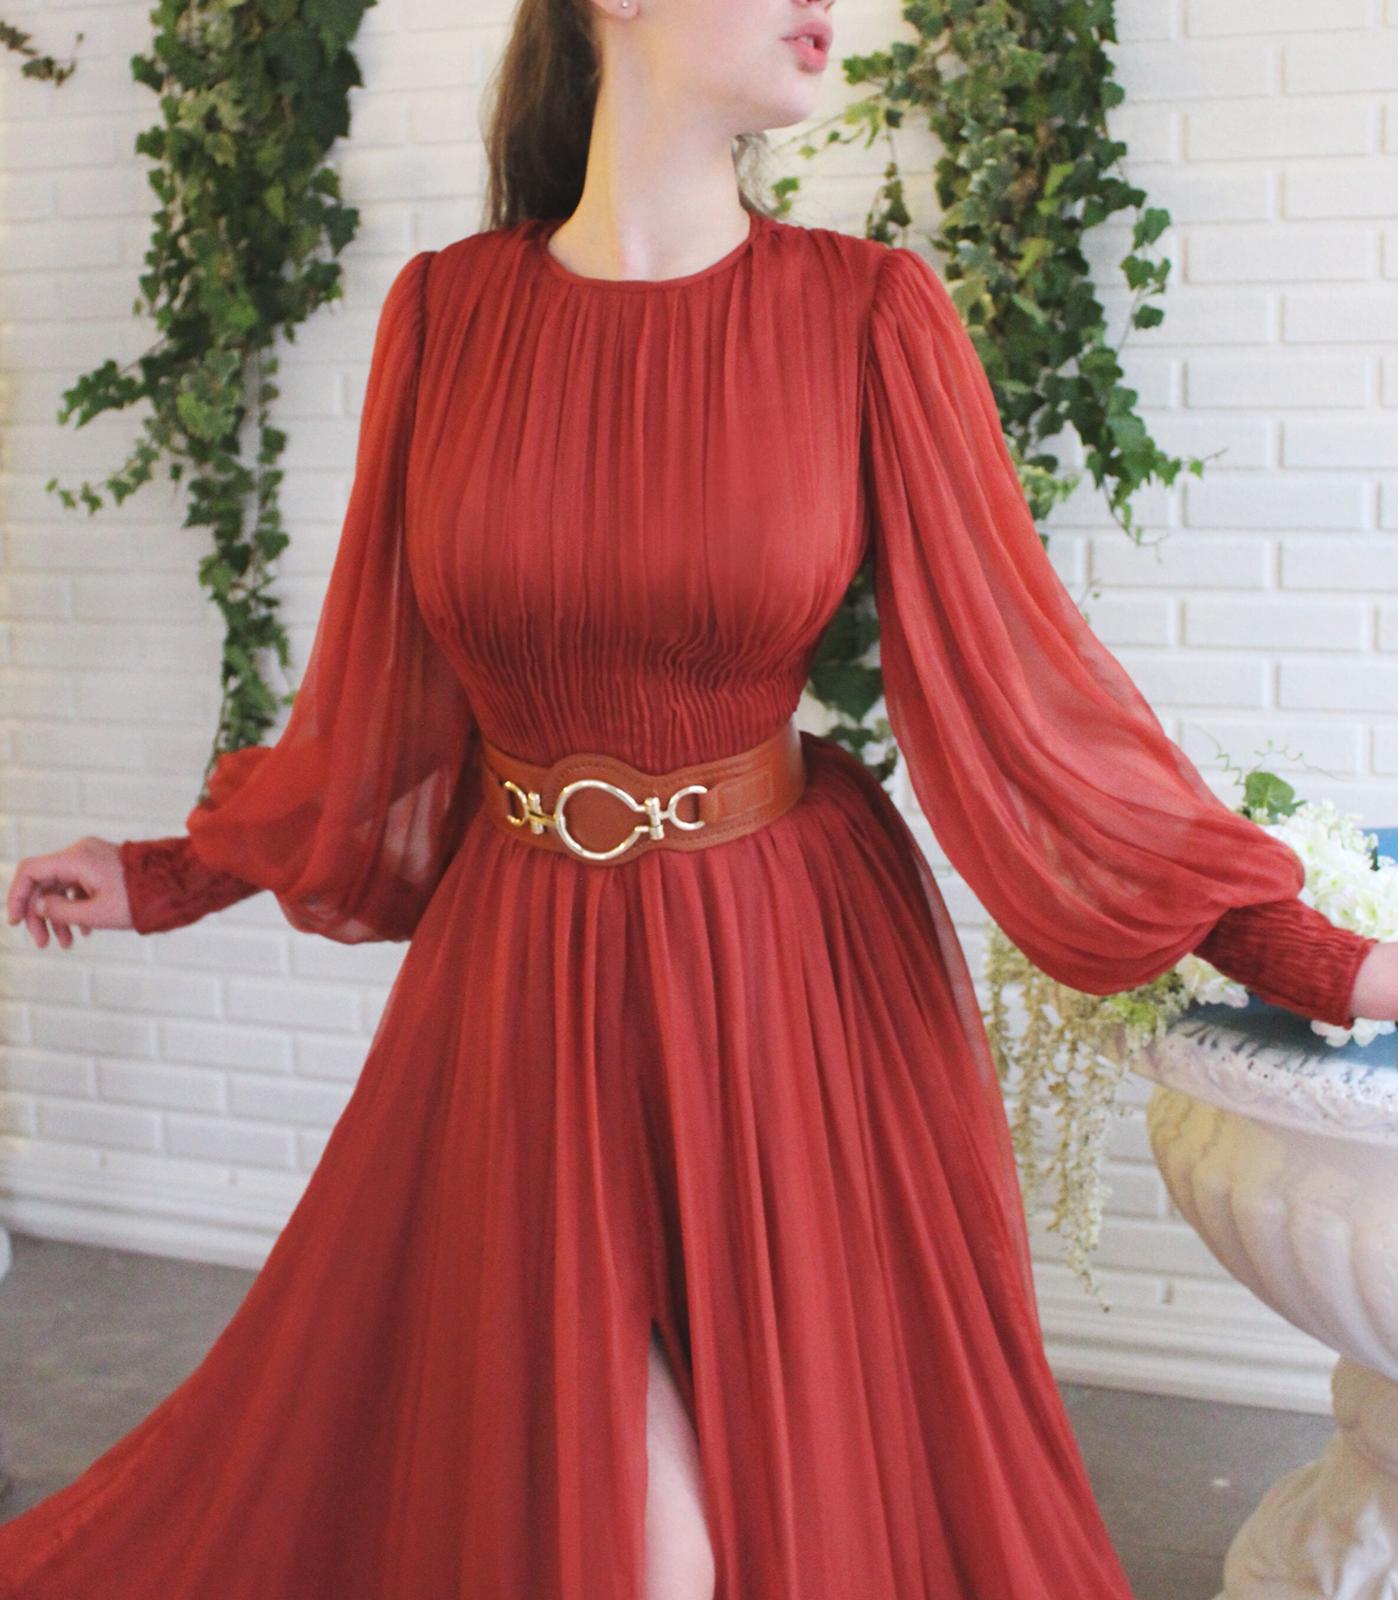 Brown A-Line dress with belt and long sleeves